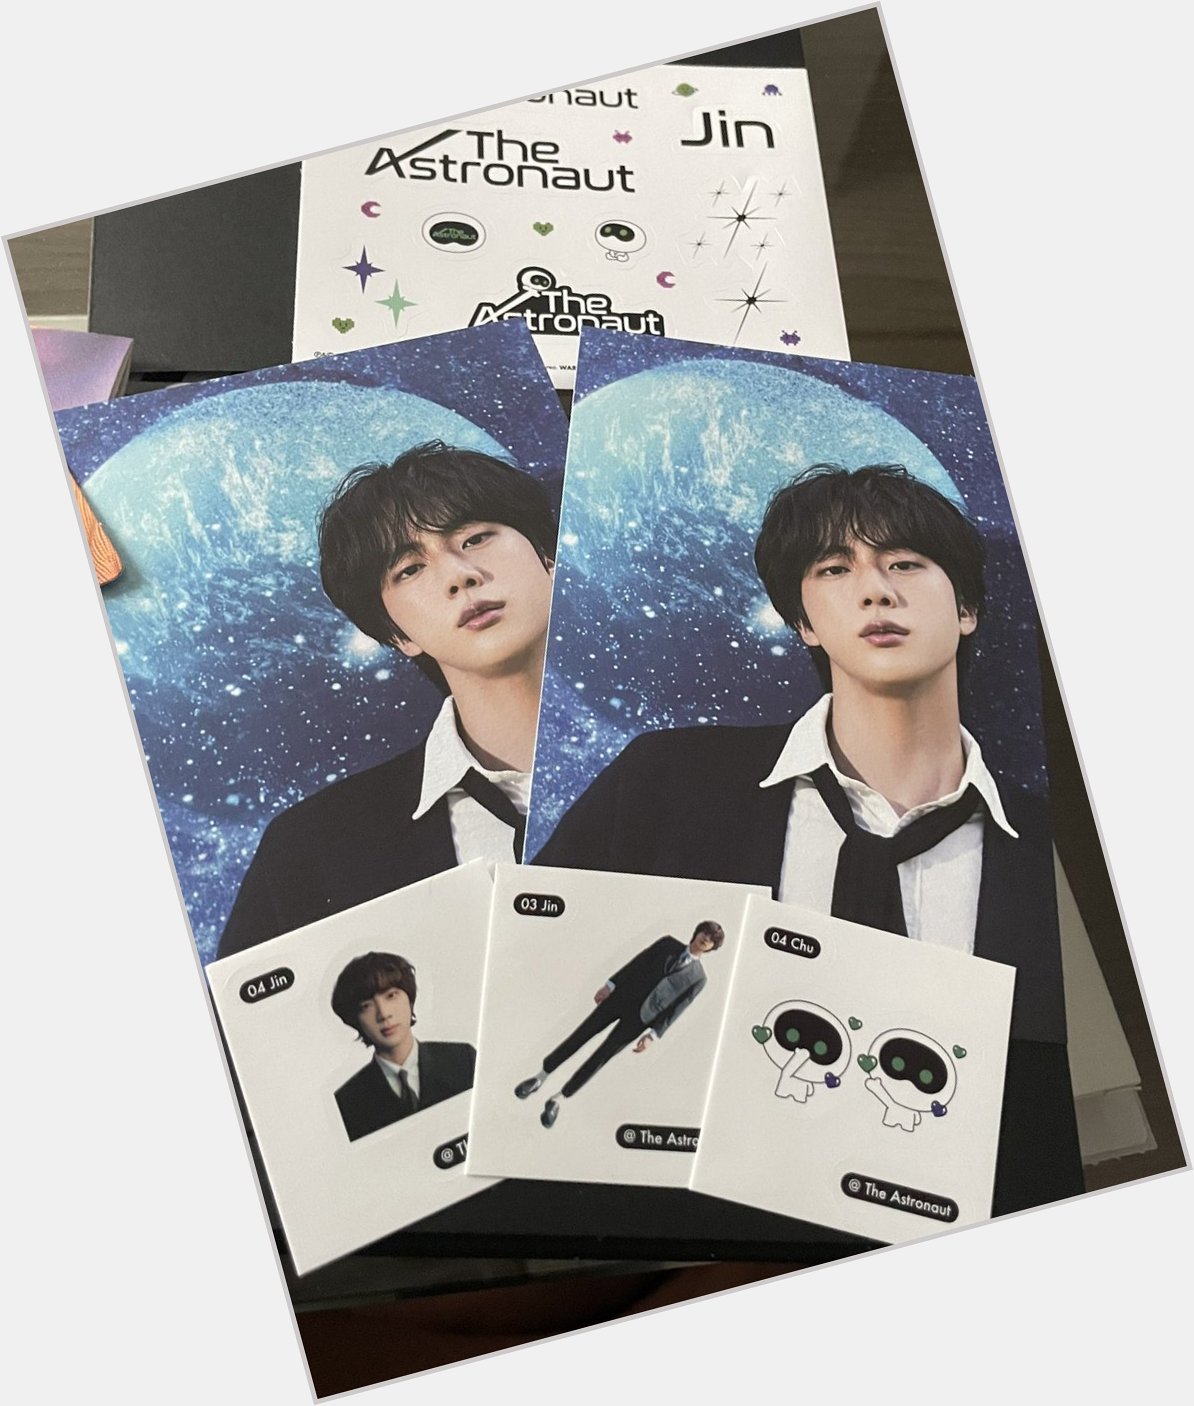 BRUH I GOT 2 POSTCARDS AND 3 SEAL STICKERS IN MY THE ASTRONAUT ALBUM??? HAPPY BIRTHDAY TO ME FR 